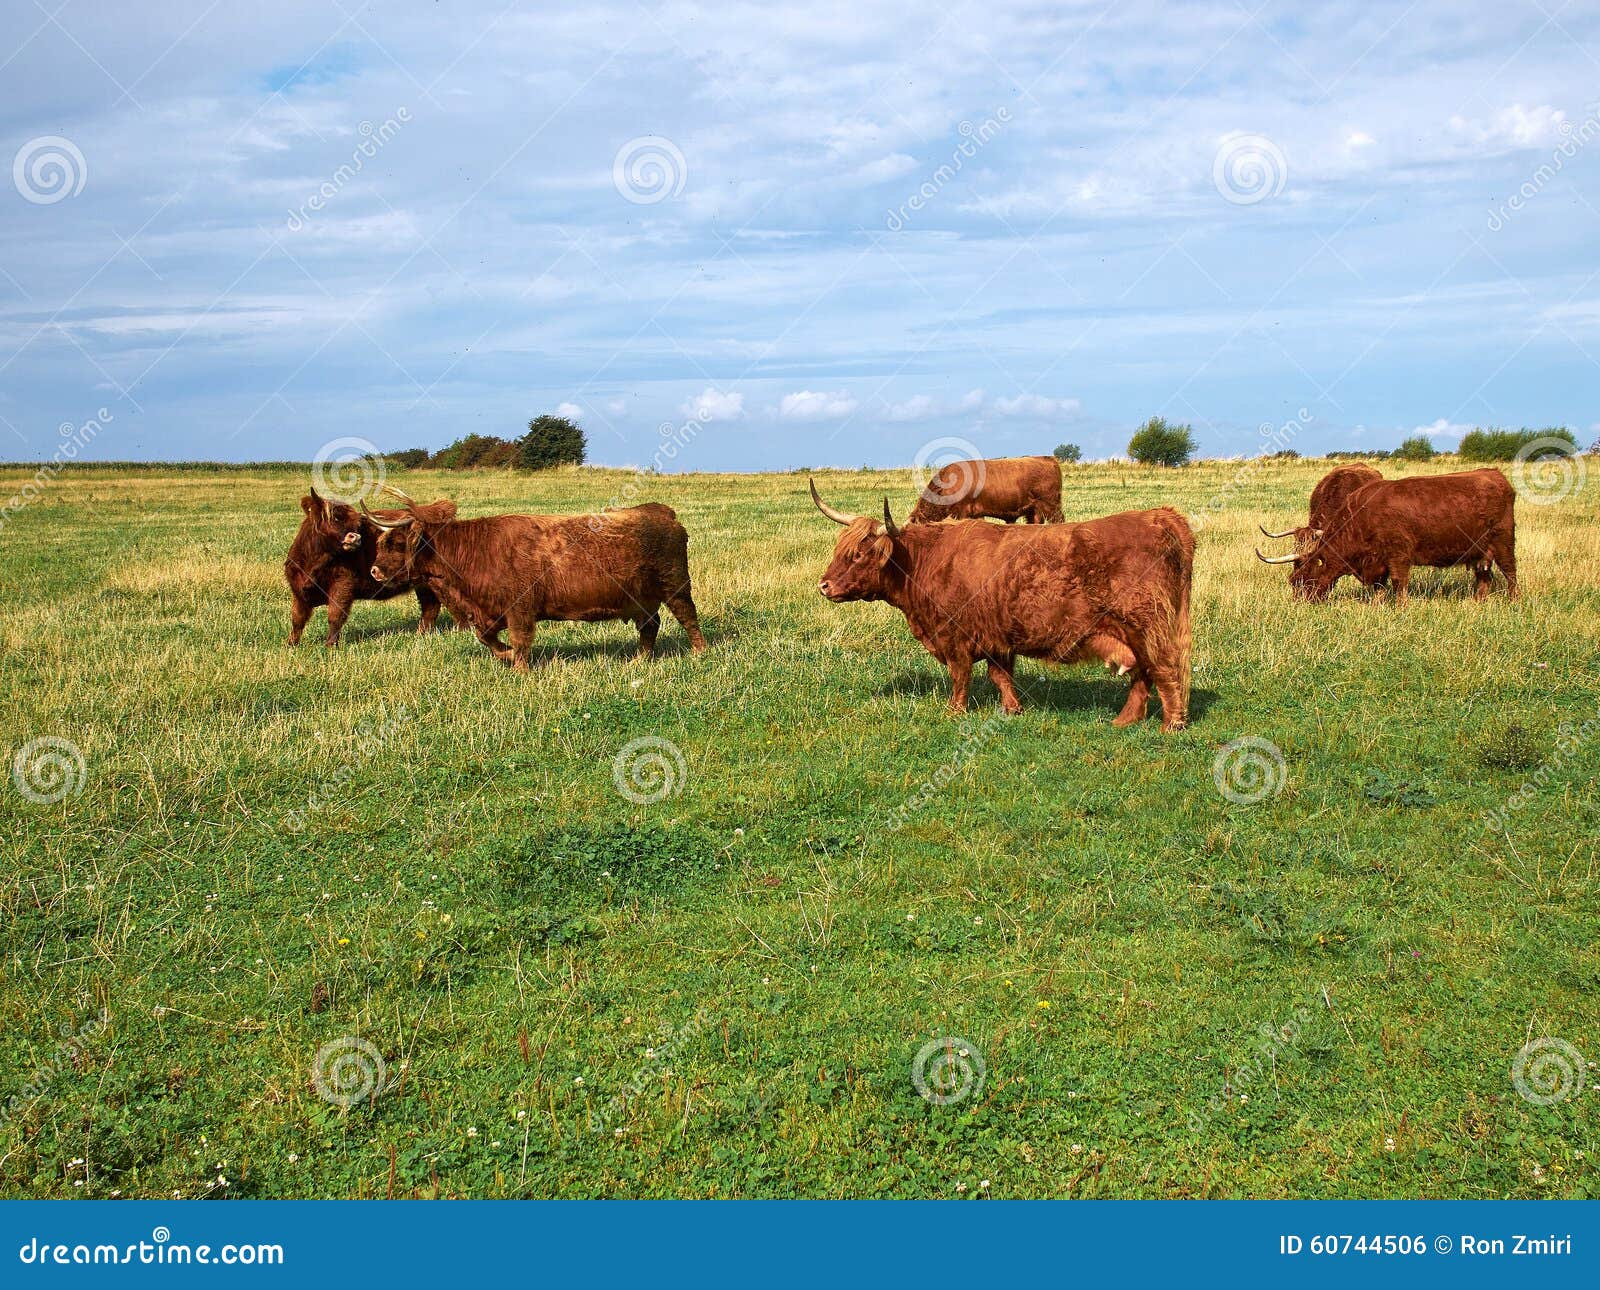 Scottish highlander ox cows grazing out in nature